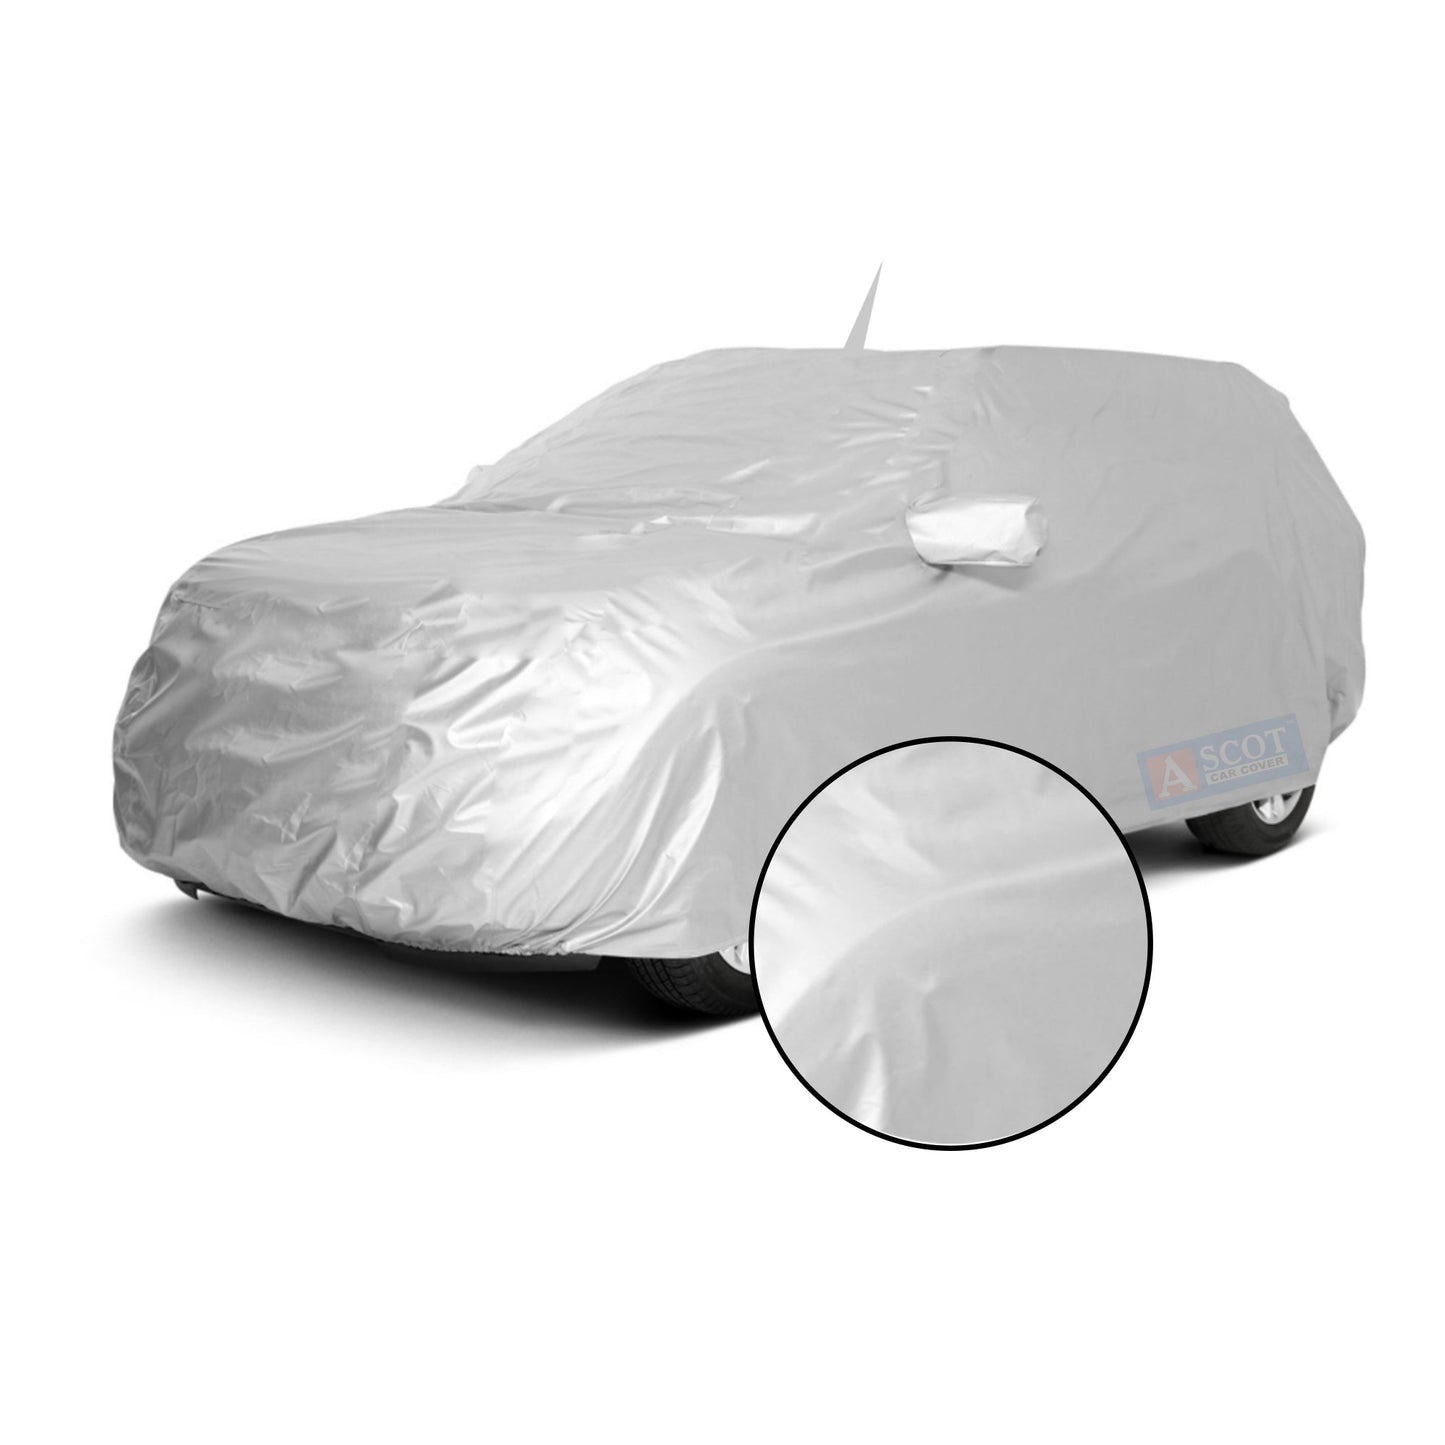 Ascot Volkswagen Vento Car Body Cover Dust Proof, Trippel Stitched